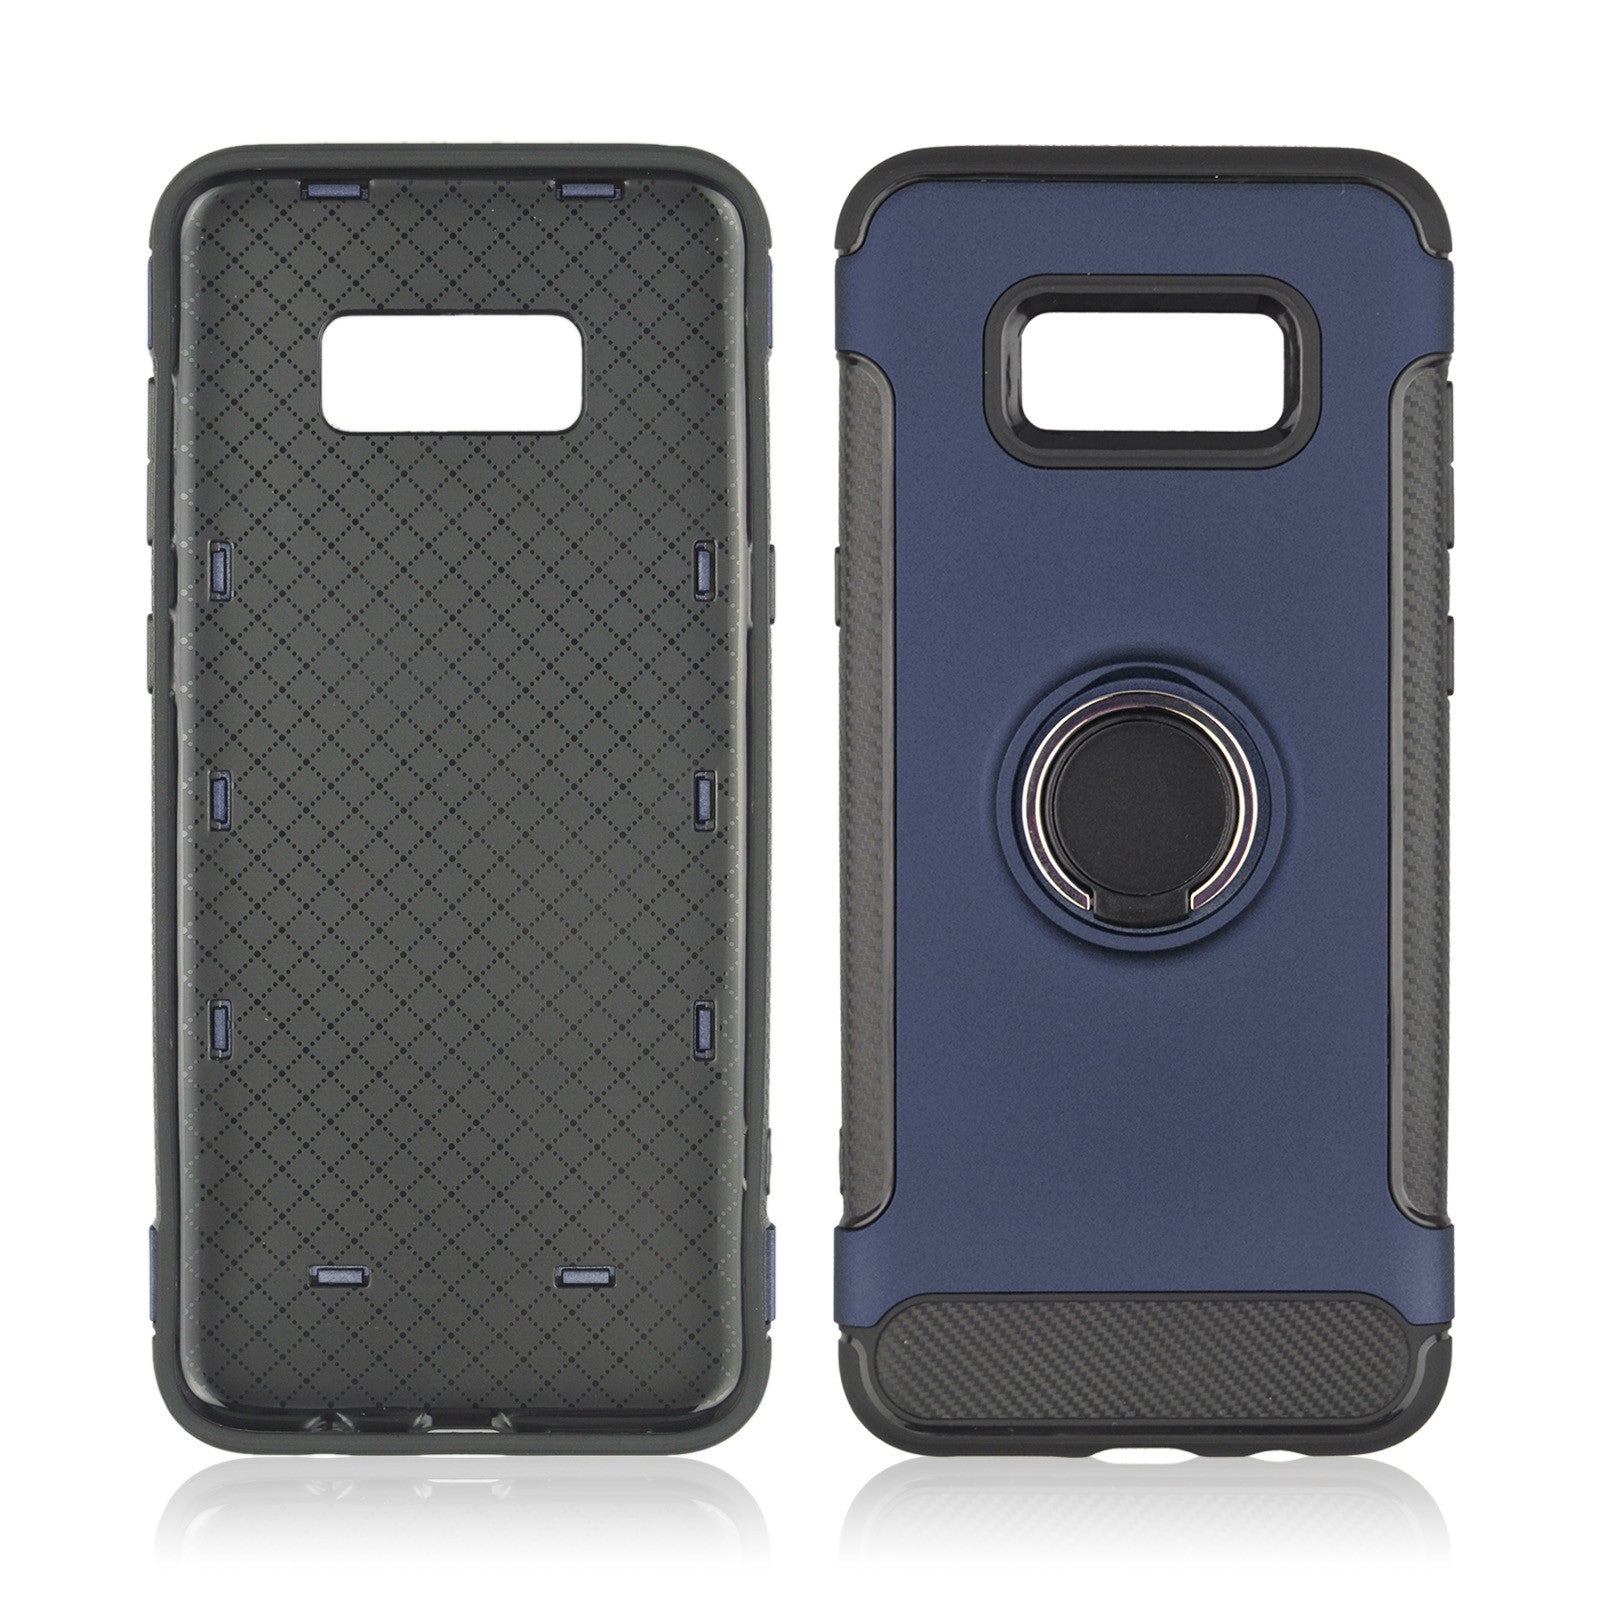 Shockproof case for Samsung Galaxy S8 Plus